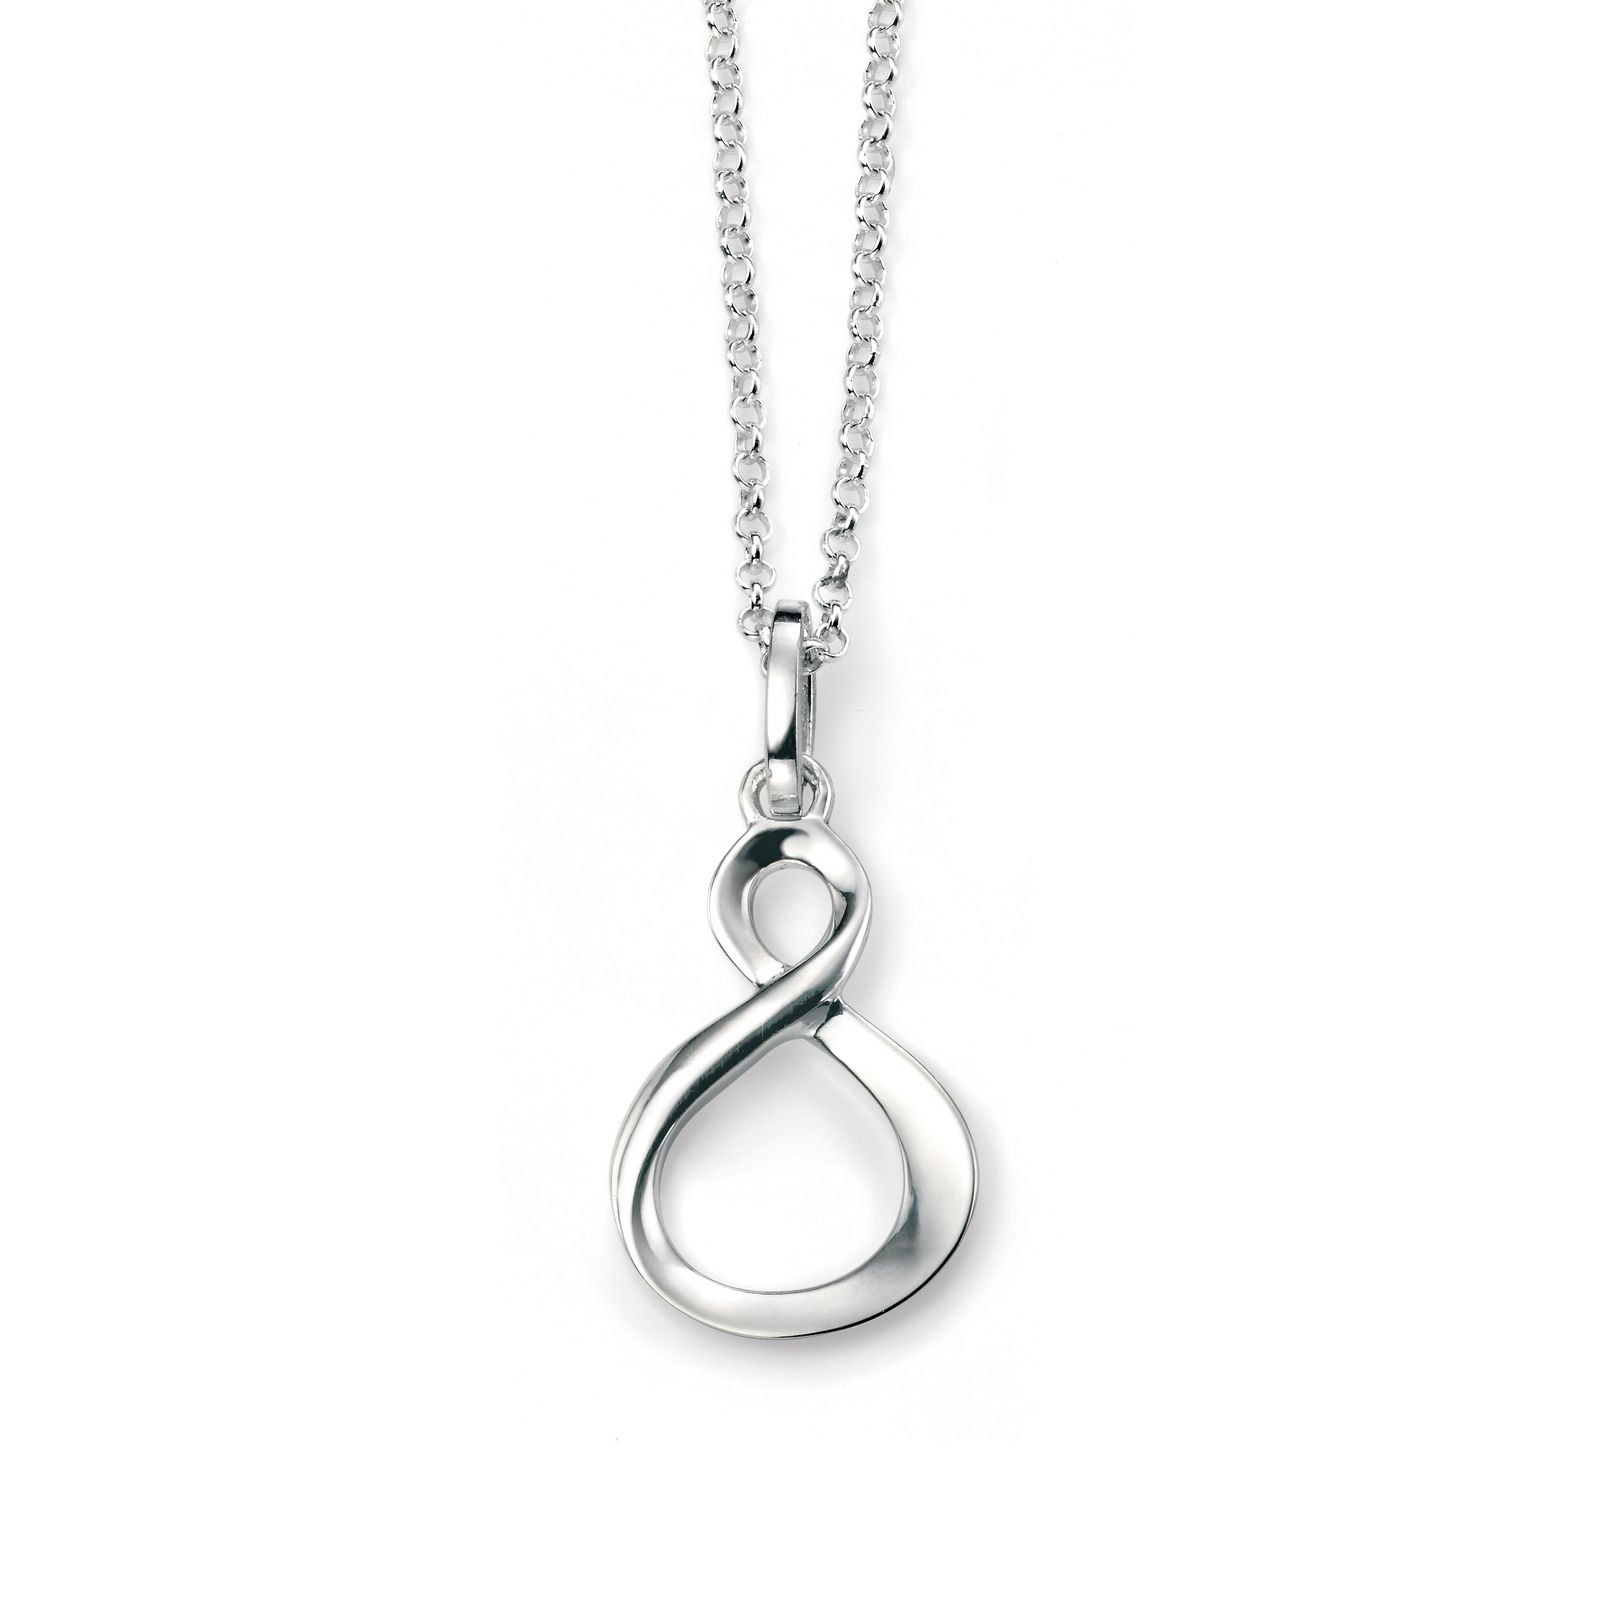 Elements Silver Infinity Loop Pendant Intended For Latest Sparkling Infinity Locket Element Necklaces (View 3 of 25)